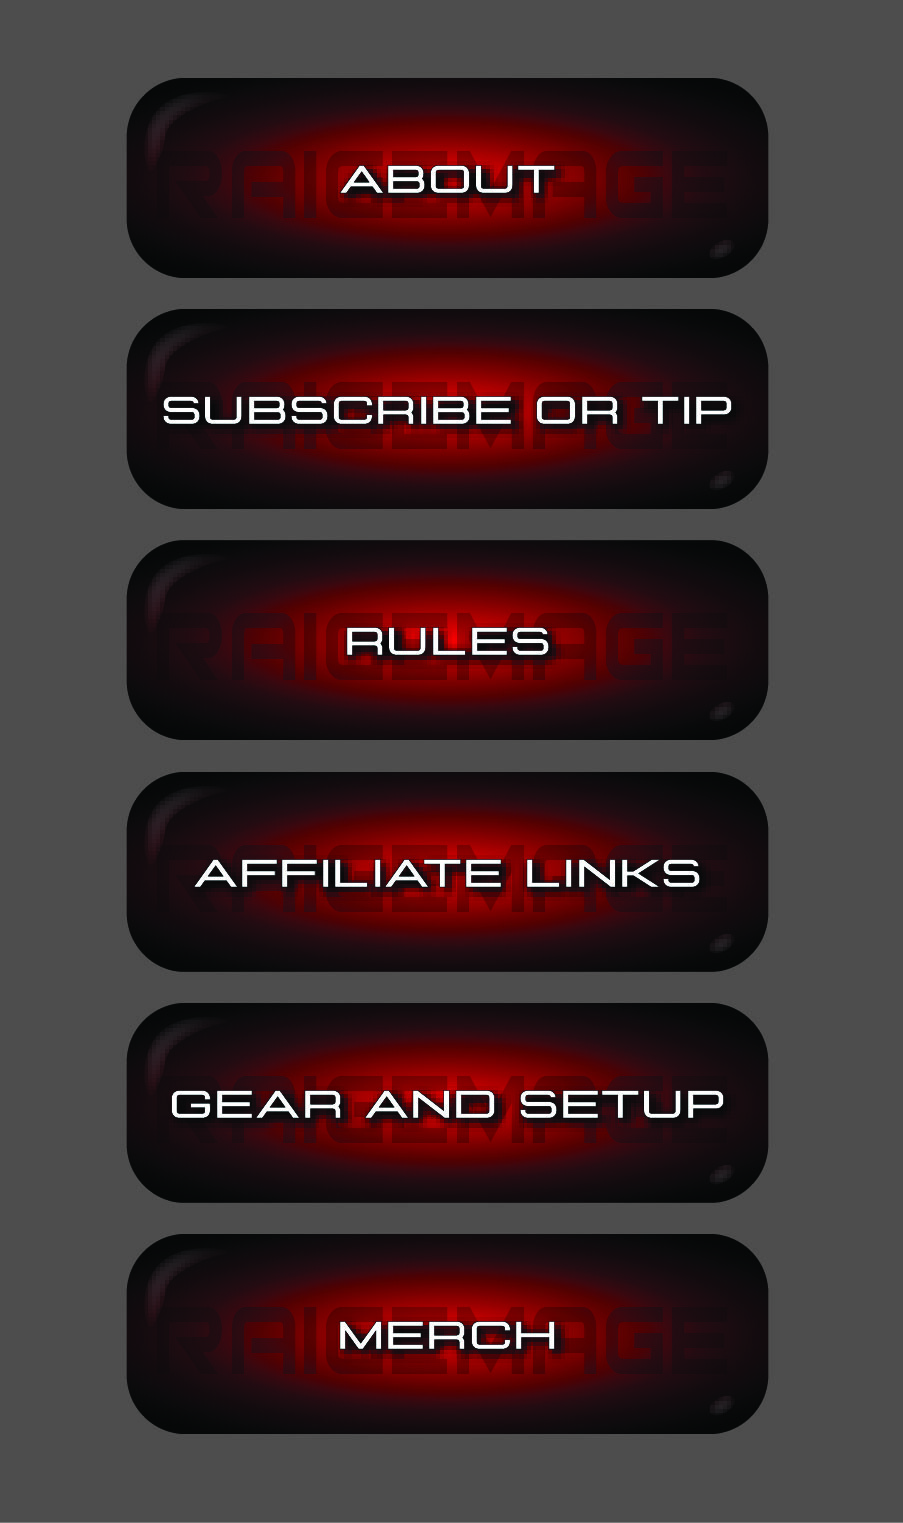 New Panel Buttons for Twitch - Adobe Illustrator